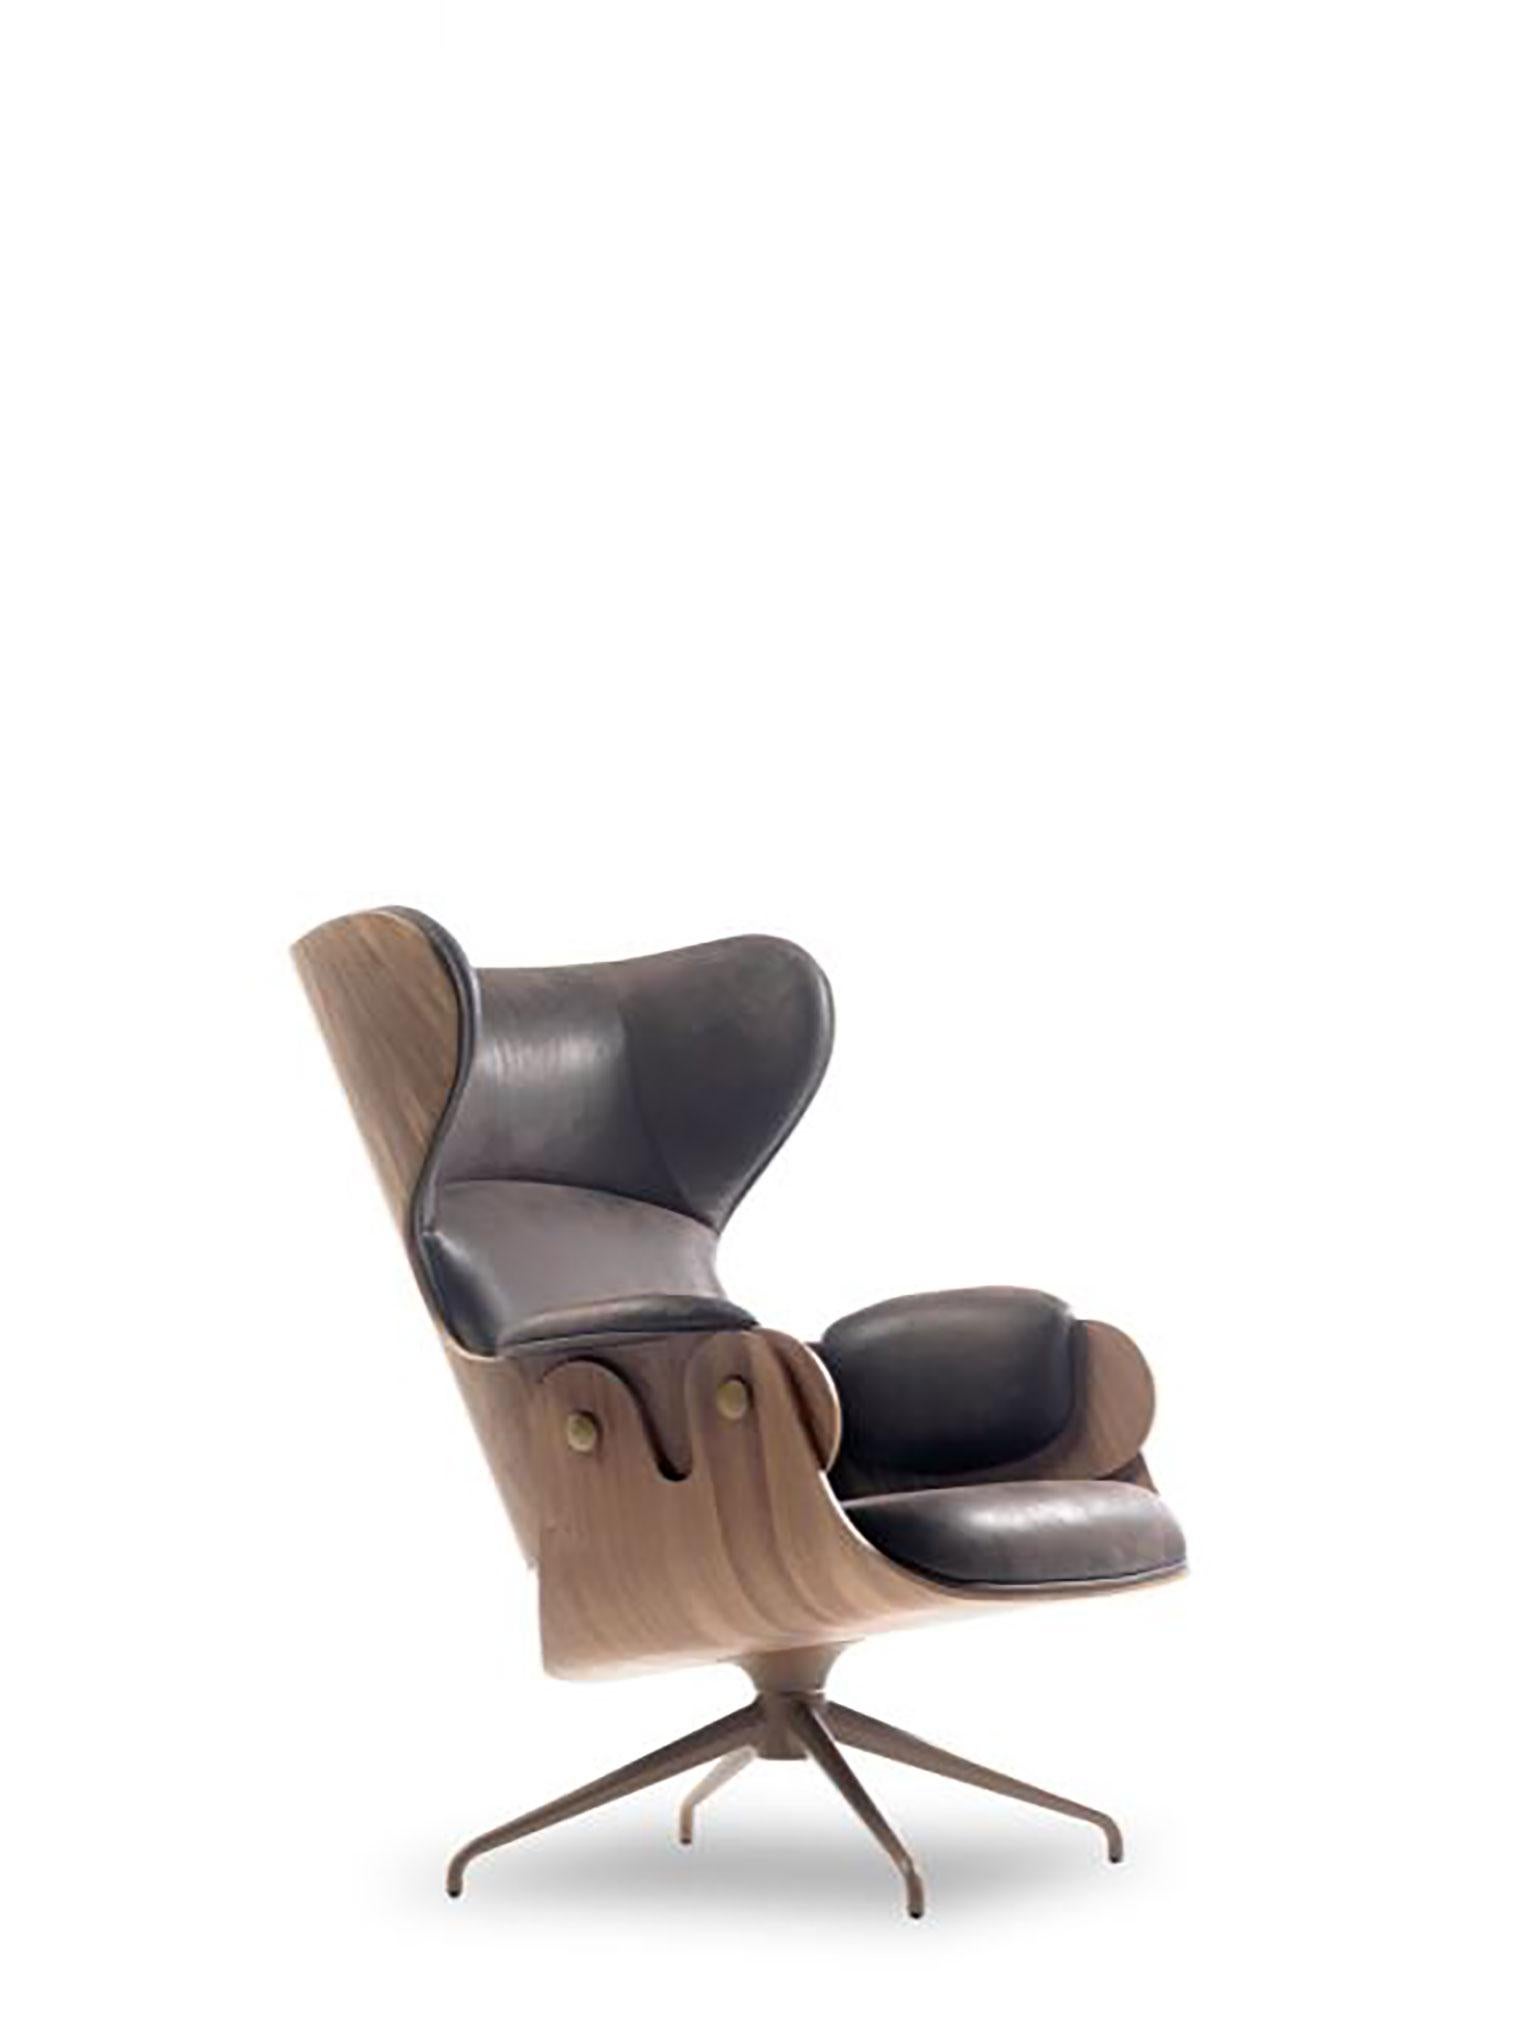 Spanish Lounger Armchair by Jaime Hayon for BD Bacelona For Sale